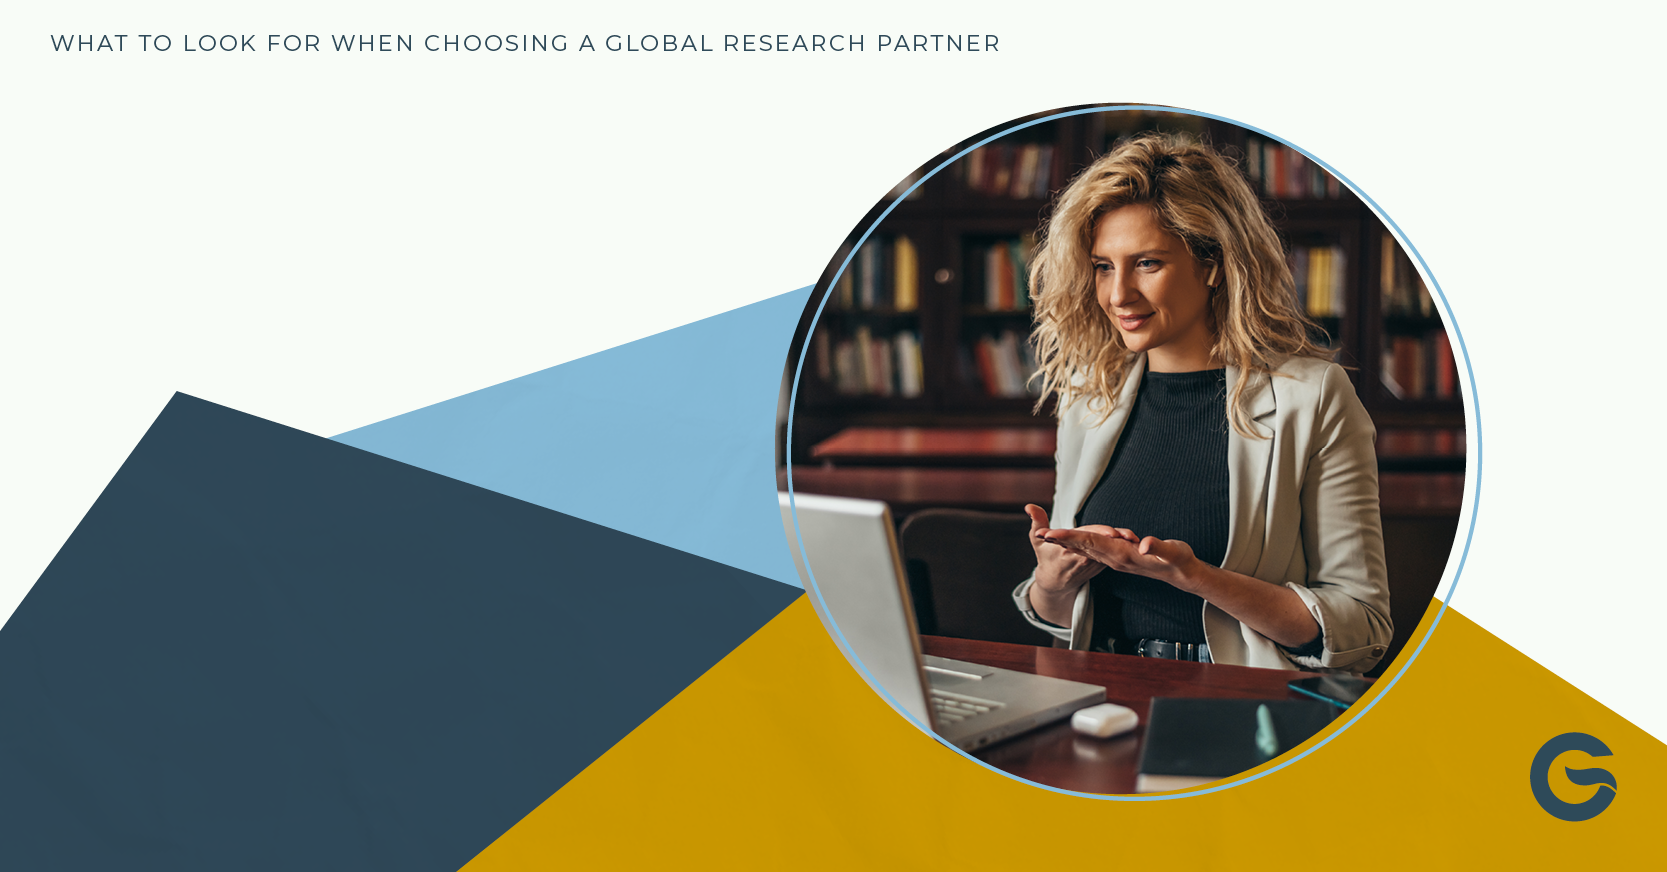 3 Reasons Why Gazelle Global is an Ideal Global Research Partner Image